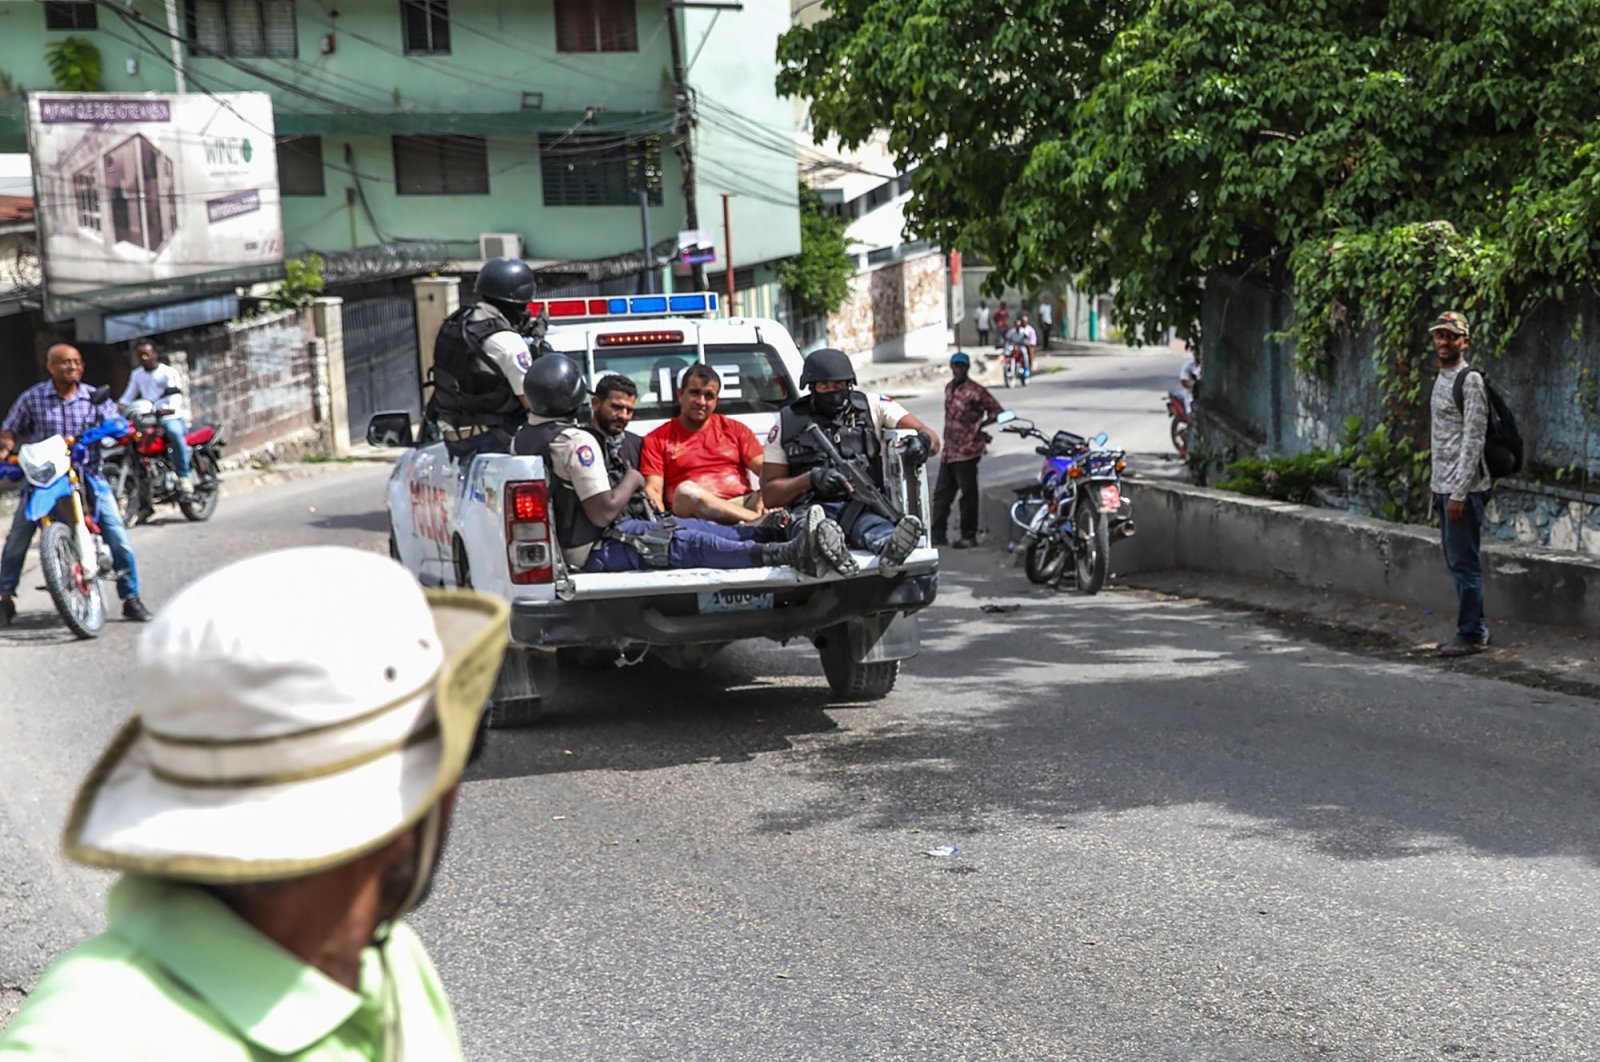 Two men accused of being involved in the assassination of Haiti President Jovenel Moise are being transported to the Petionville station in a police car in Port-au-Prince, Haiti, July 8, 2021. (AFP Photo)